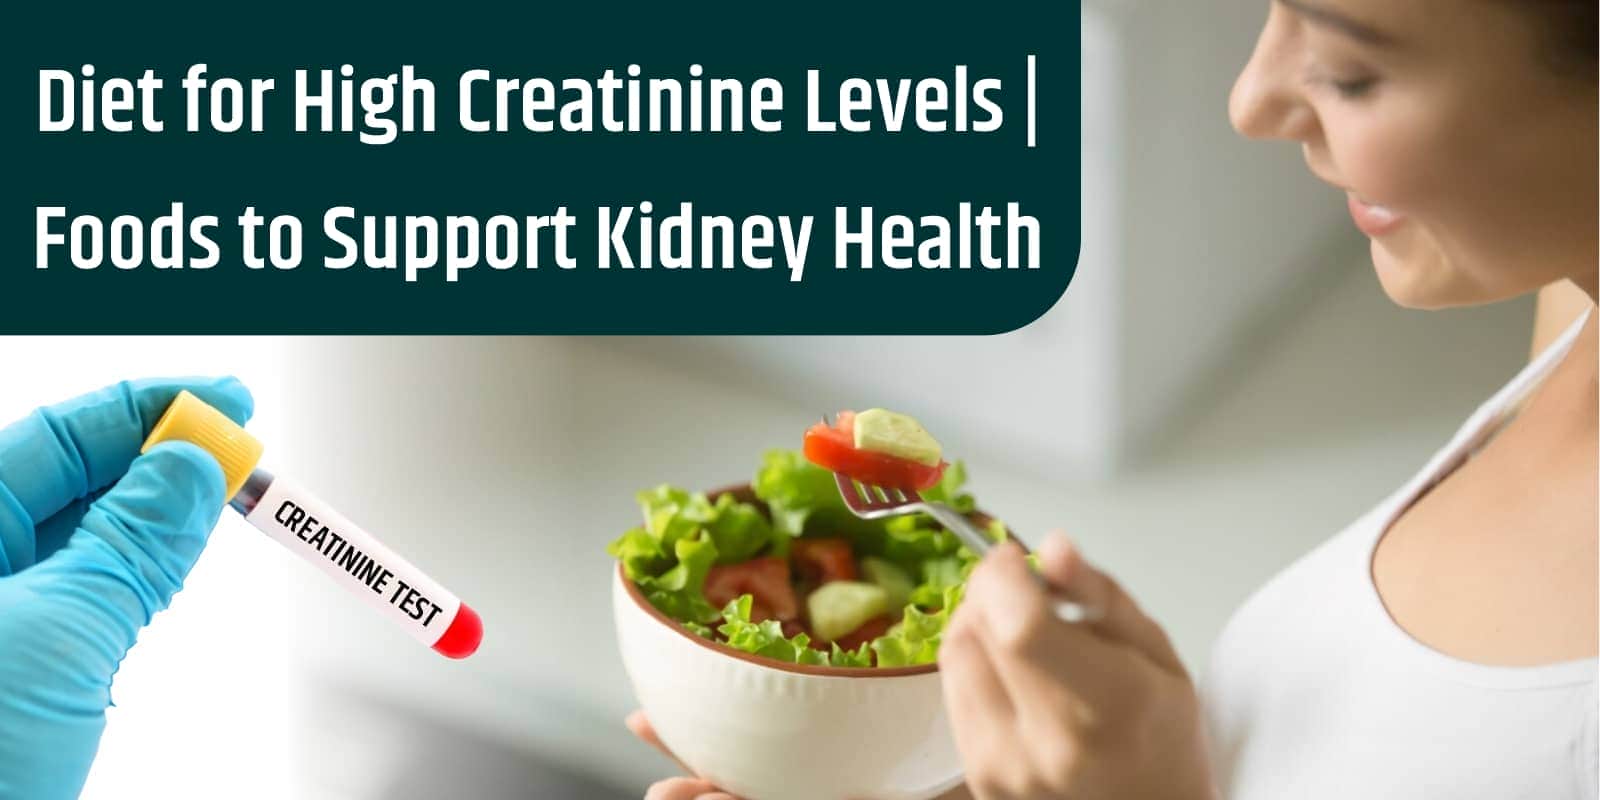 Diet for High Creatinine Levels | Foods to Support Kidney Health